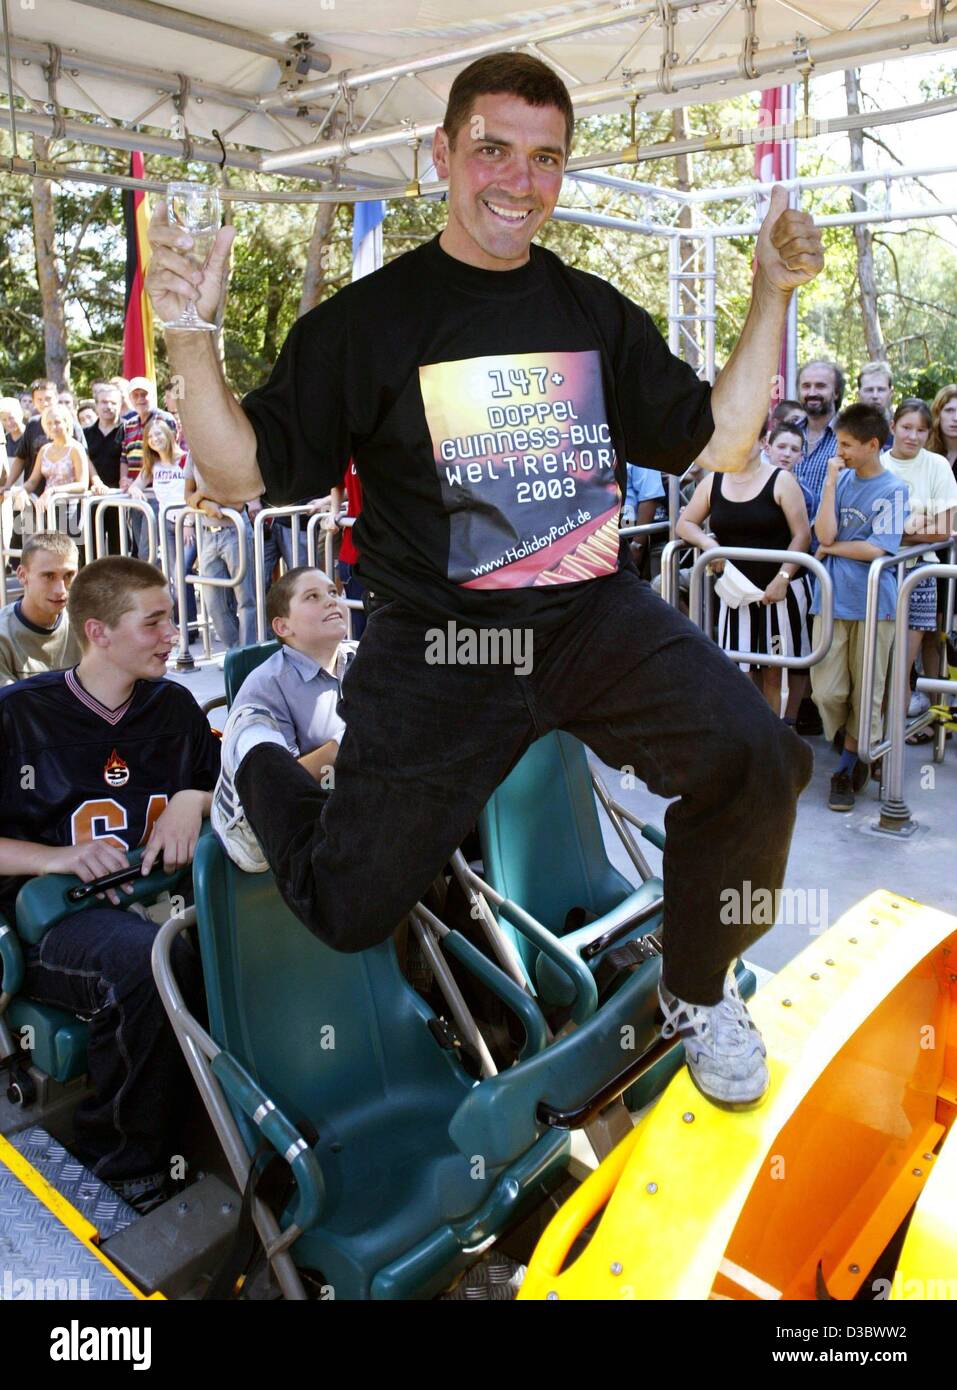 (dpa) - US American Richard Rodriguez poses with a glass of champagne on the rollercoaster in the amusement park Holiday Park in Hassloch, Germany, 26 August 2003. His t-shirt reads 'double Guinness book world record'. The highschool teacher from Chicago broke the world record in continous rollercoa Stock Photo